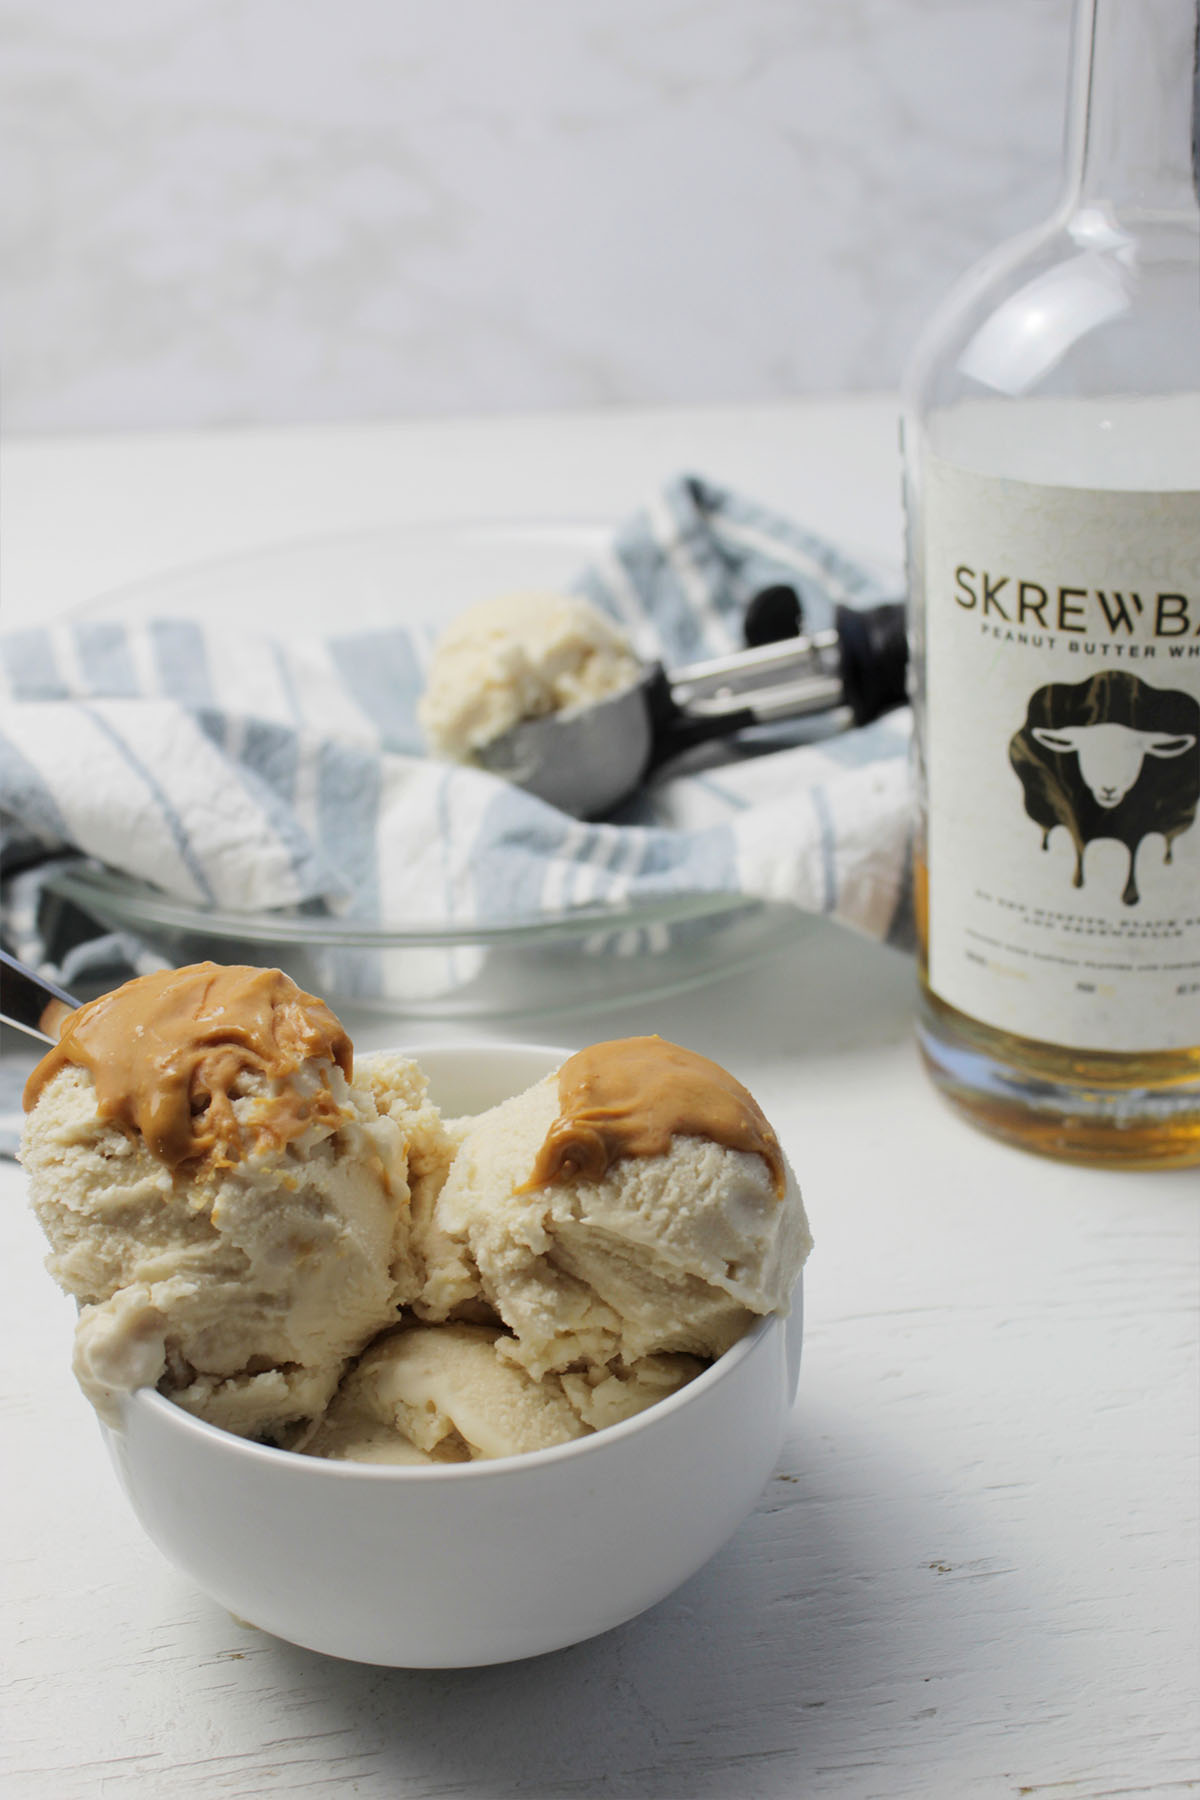 ice cream scoops in a serving bowl next to alcohol bottle.